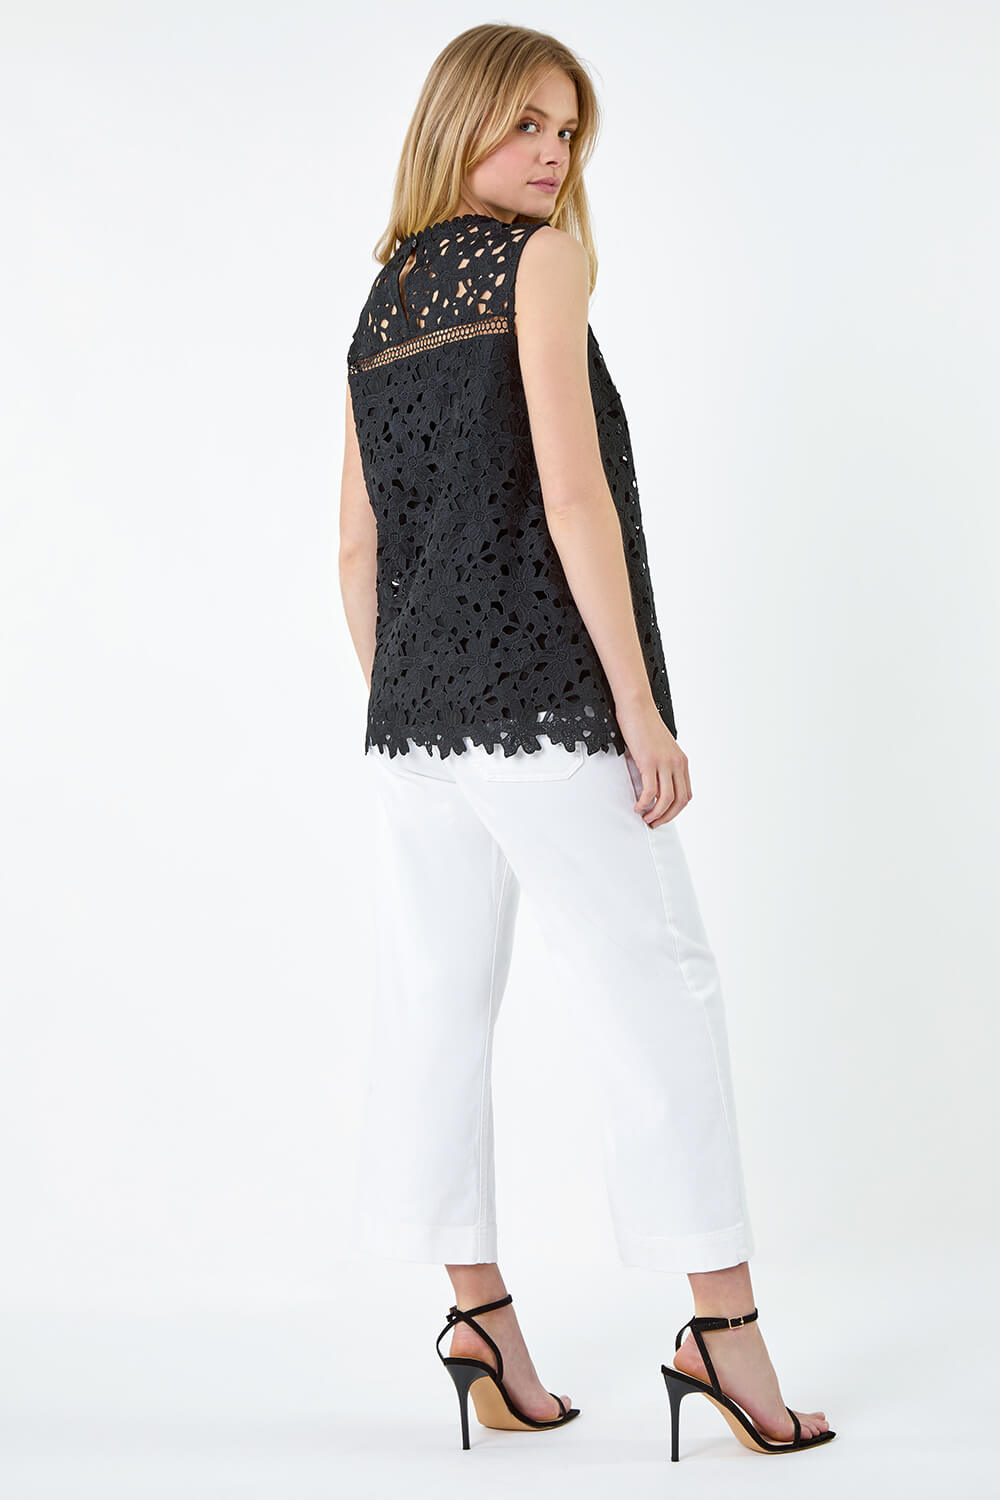 Black Ladder Trim Lace Jersey Top, Image 3 of 5